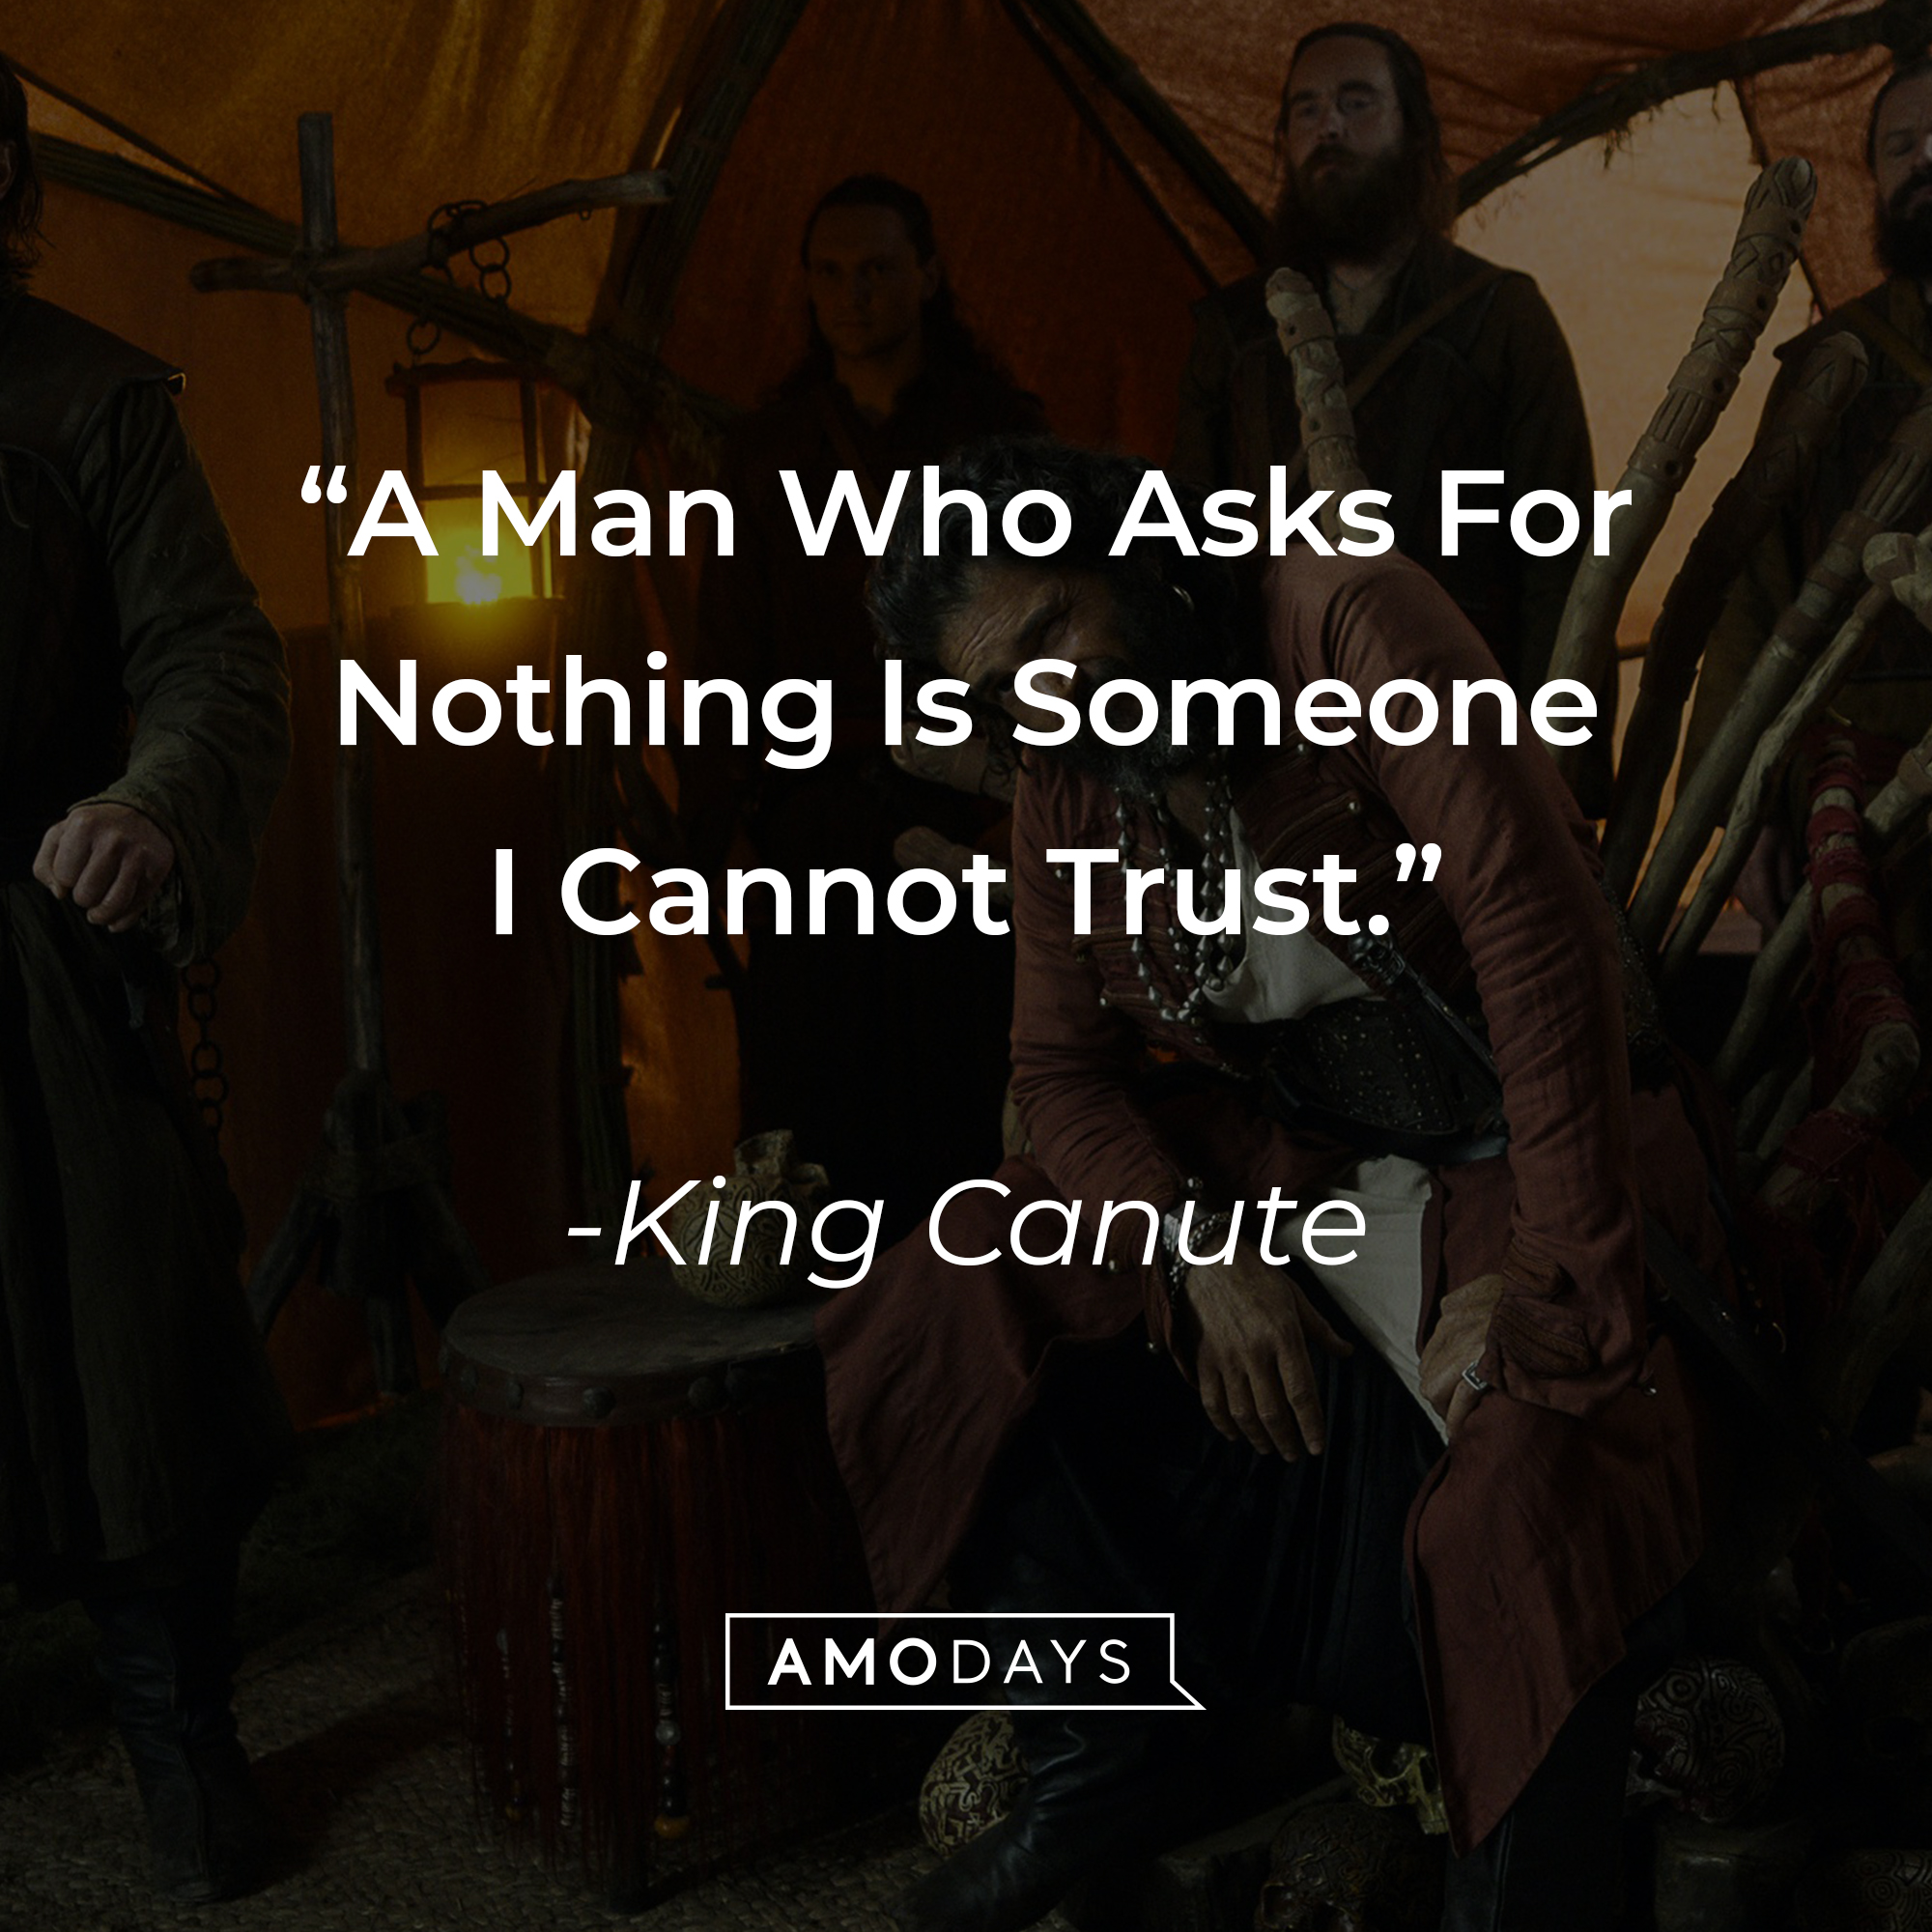 King Canute's quote: "A Man Who Asks For Nothing Is Someone I Cannot Trust."┃Source: facebook.com/netflixvalhalla